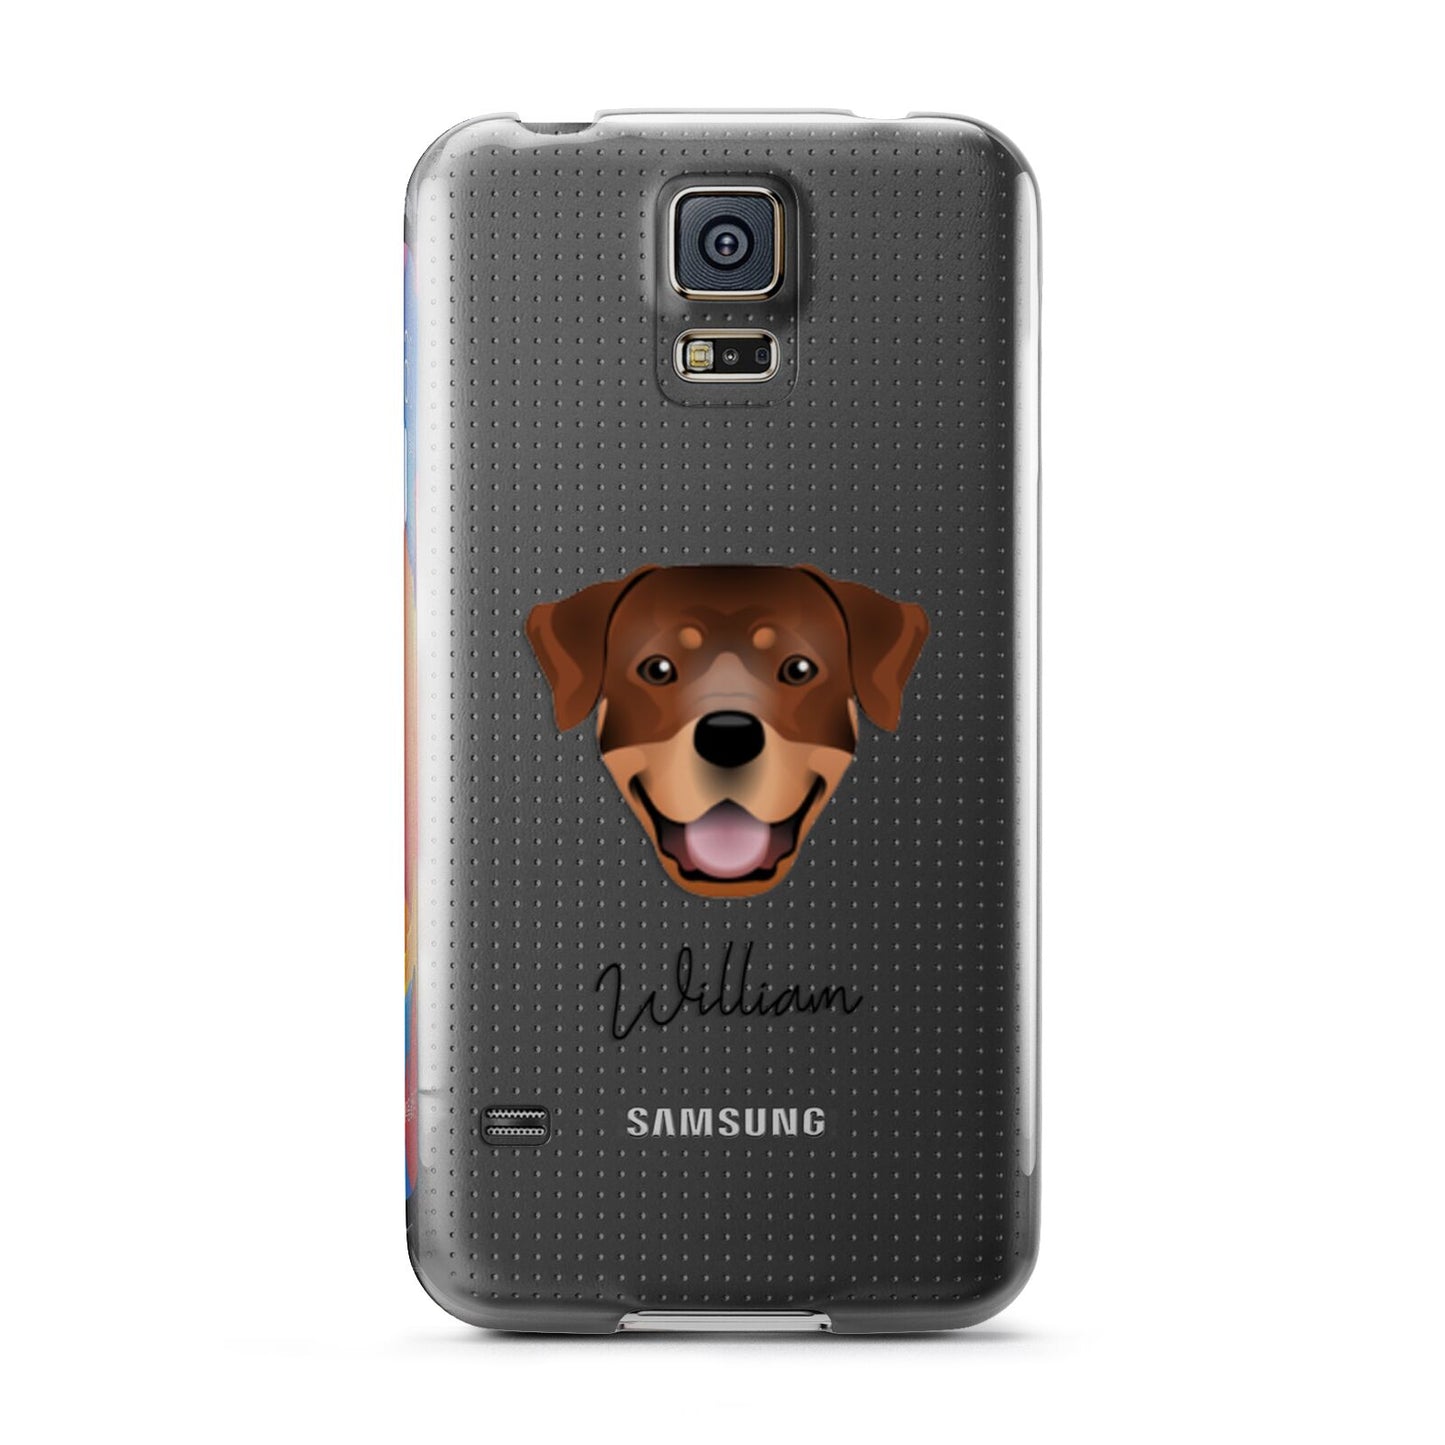 Rottweiler Personalised Samsung Galaxy S5 Case